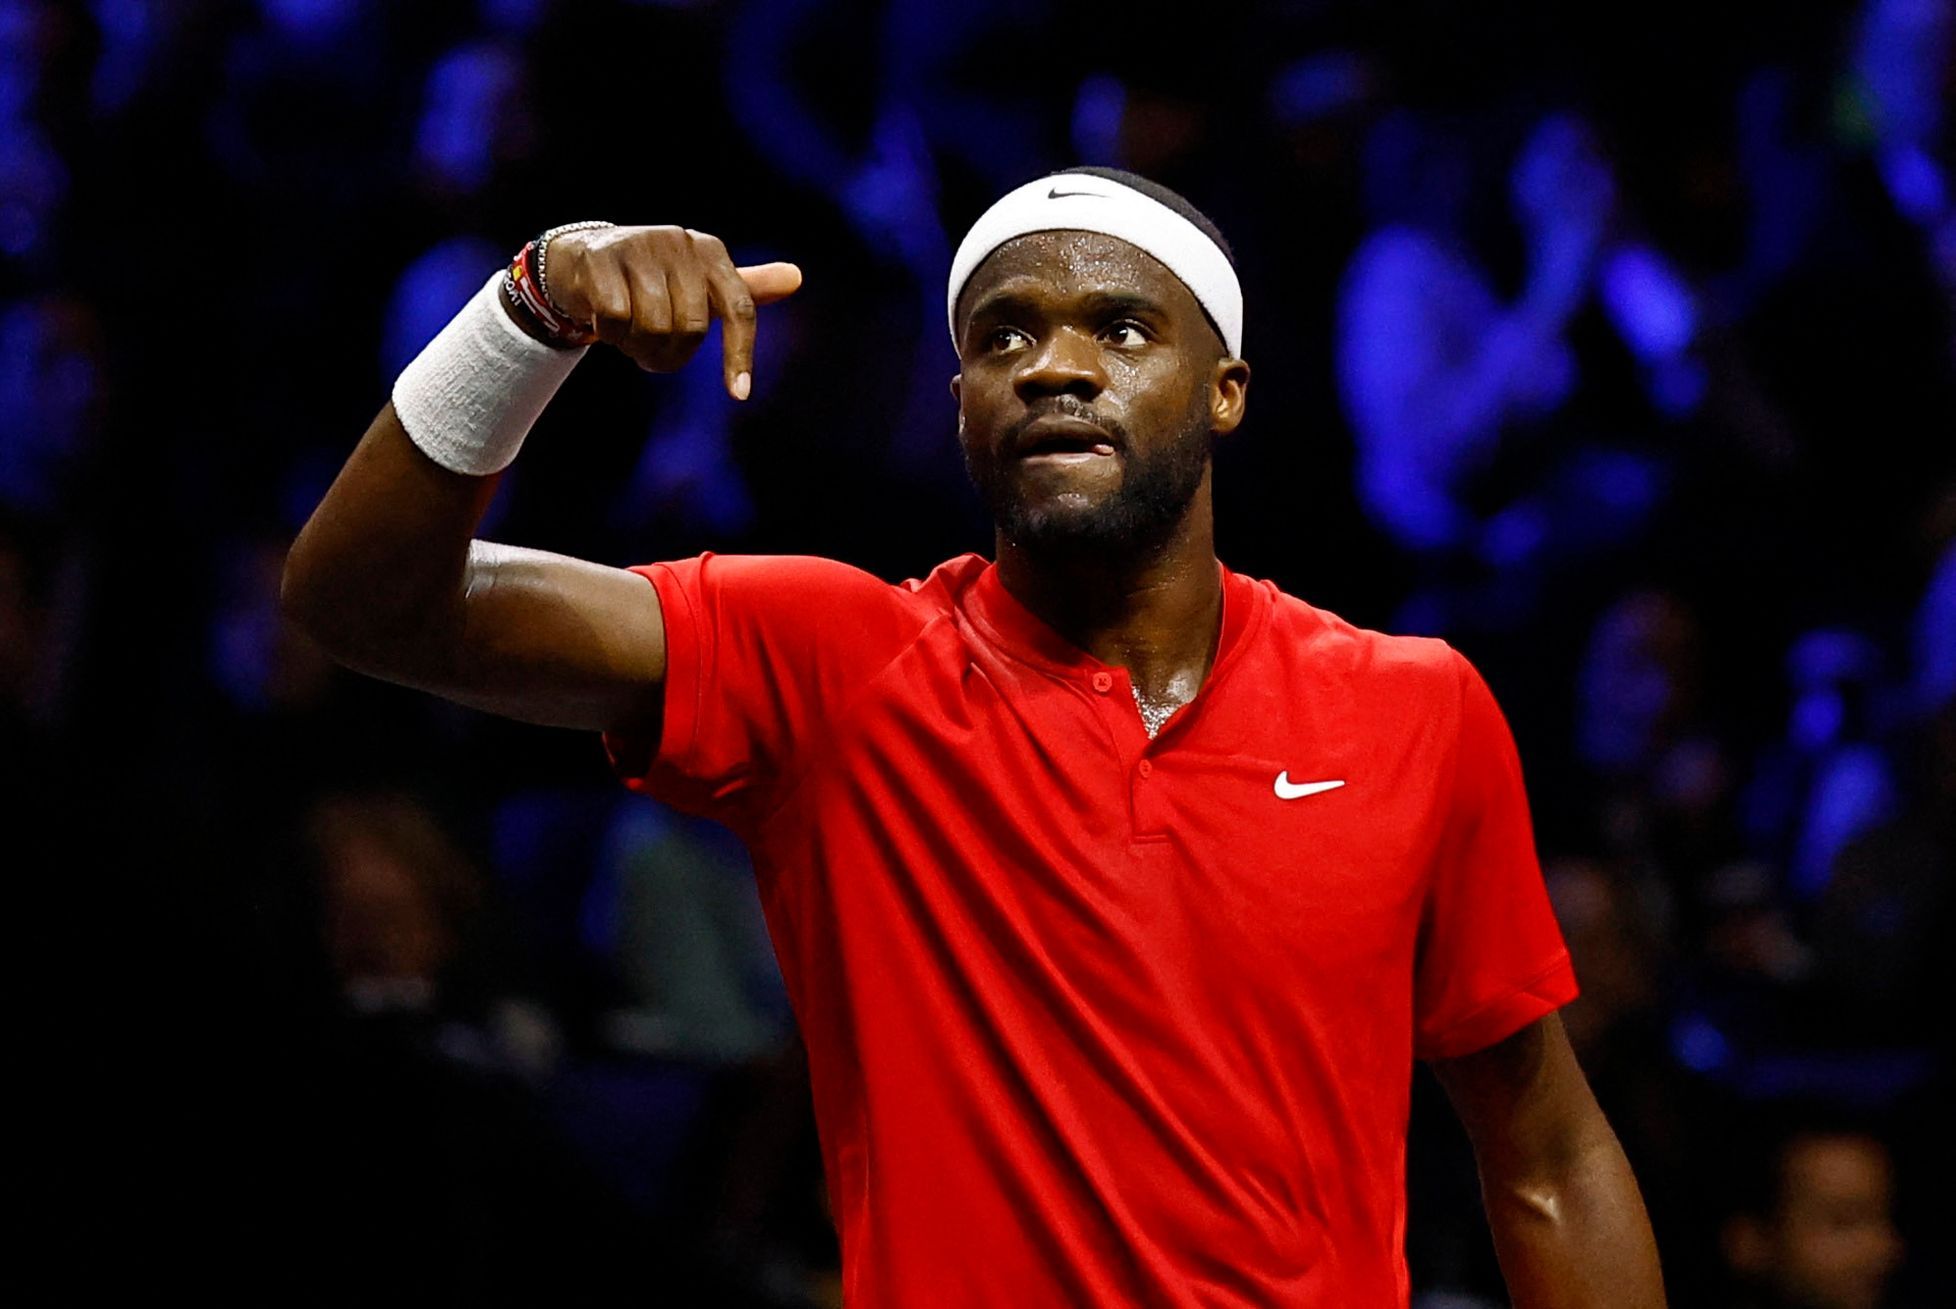 Tiafoe took it as a spoiled farewell to Federer.  He should apologize, say the Americans